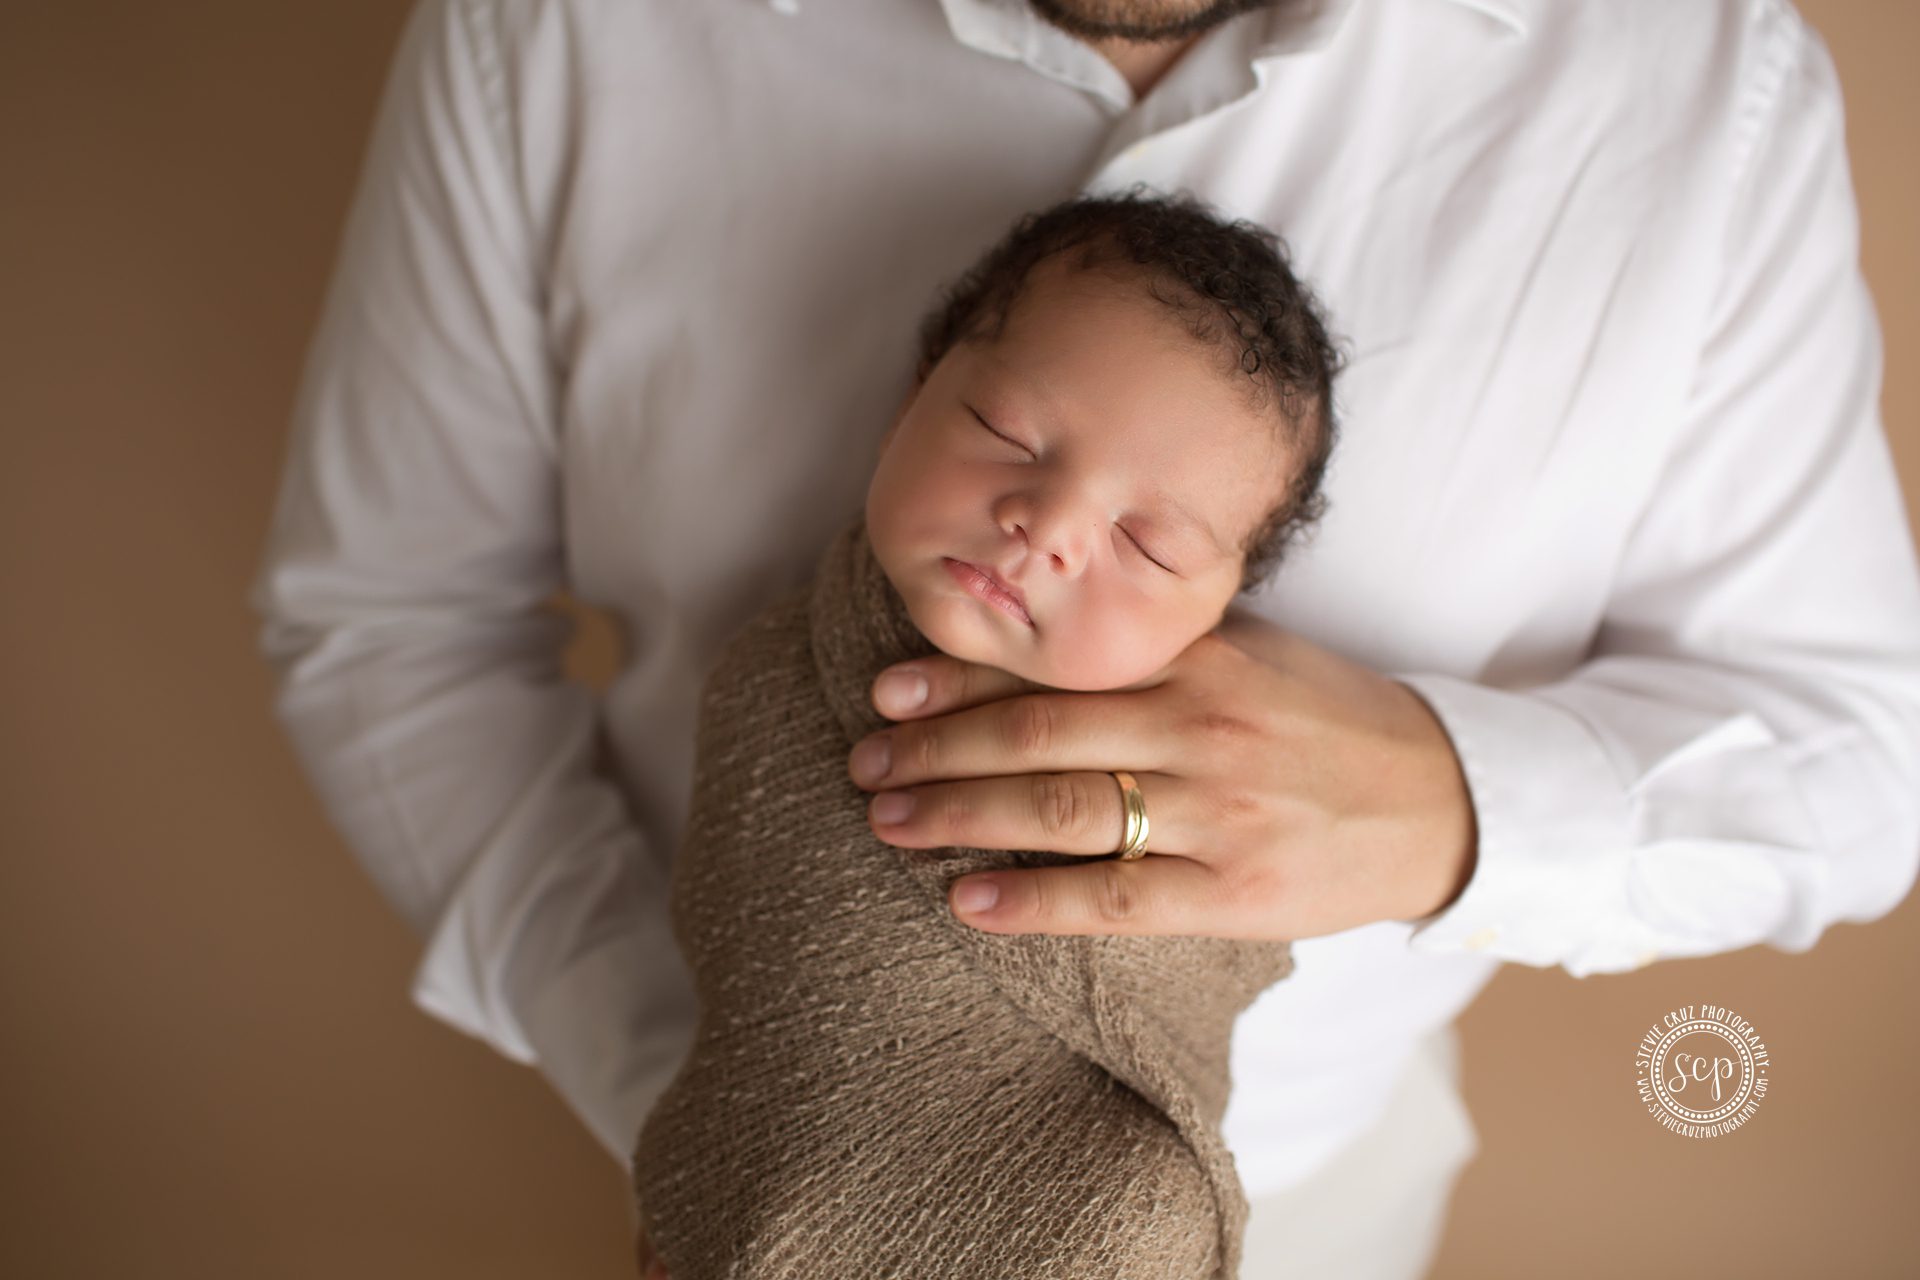 newborn baby all cozy with father for a picture during his newborn photoshoot